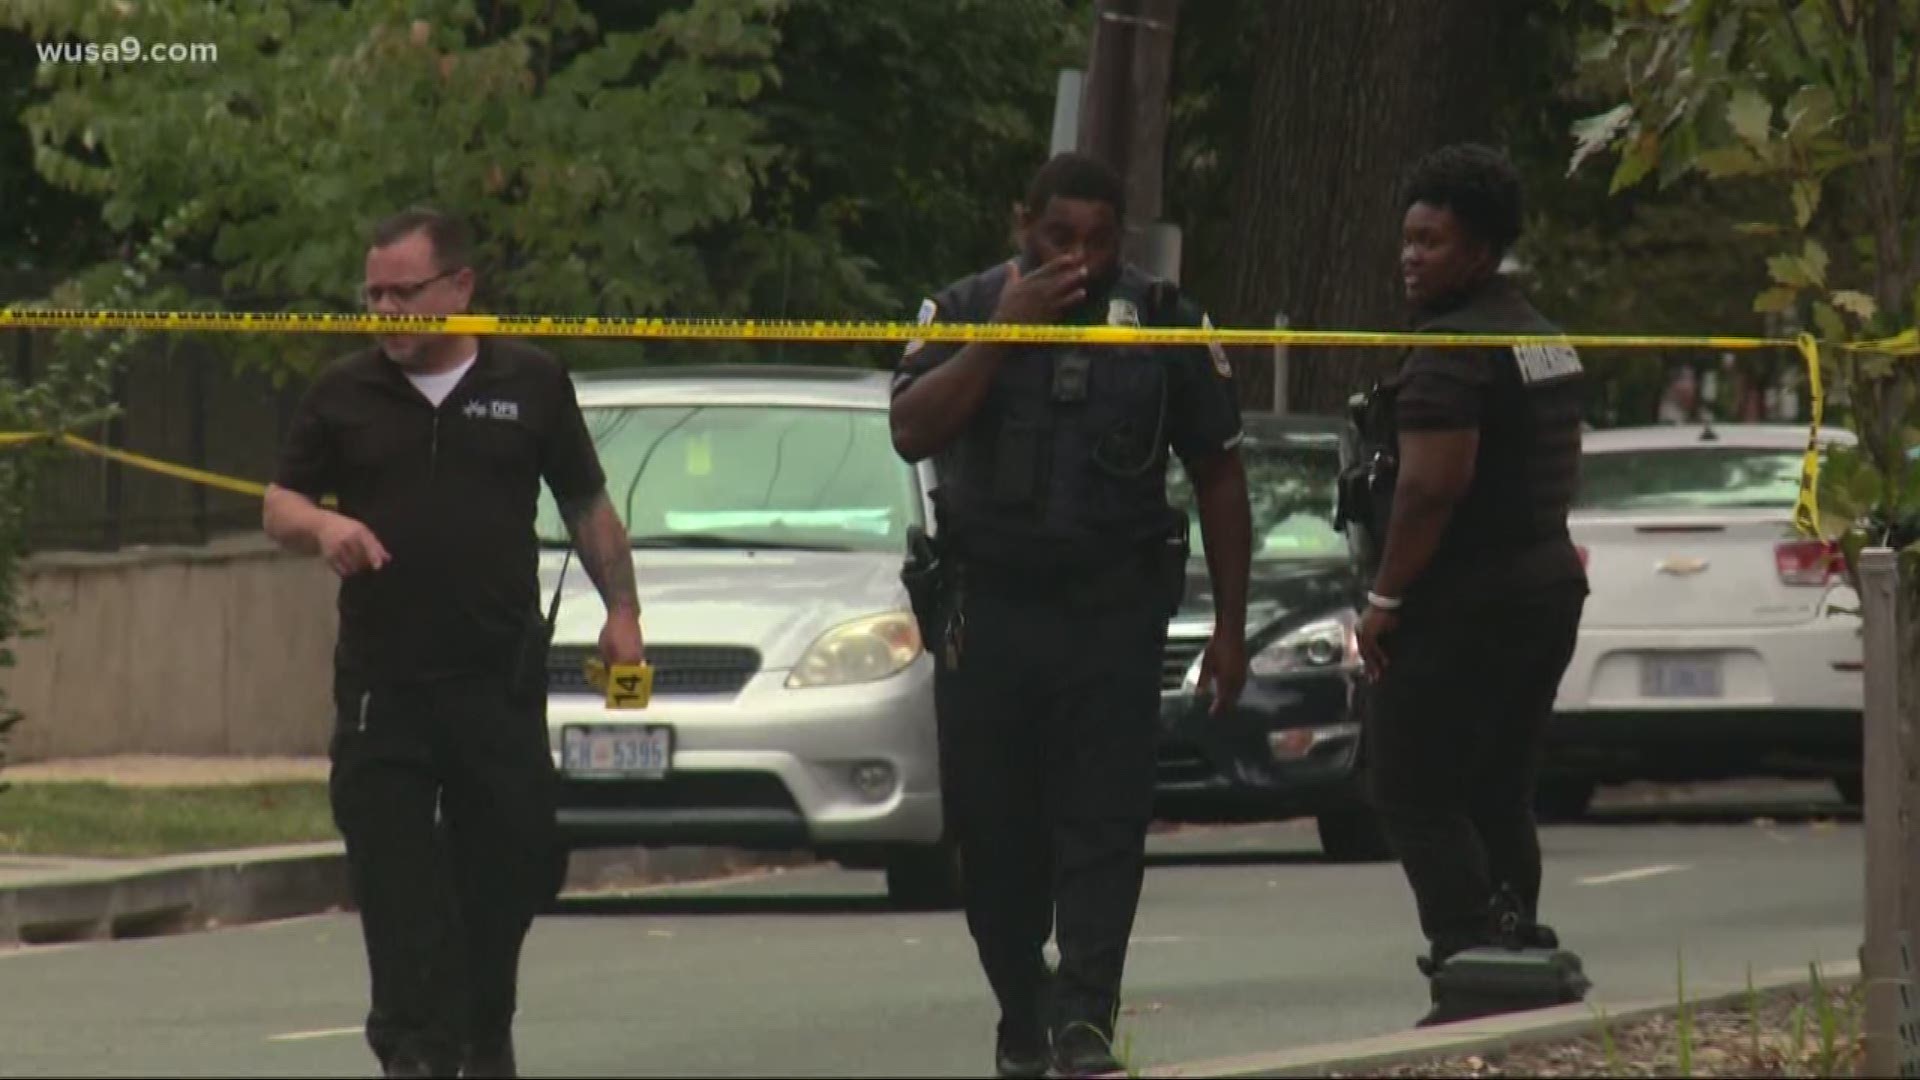 Police are investigating after a shooting in Southeast Washington D.C. Tuesday afternoon that left at least one person injured. It happened in the 3900 block of Pennsylvania Avenue SE.